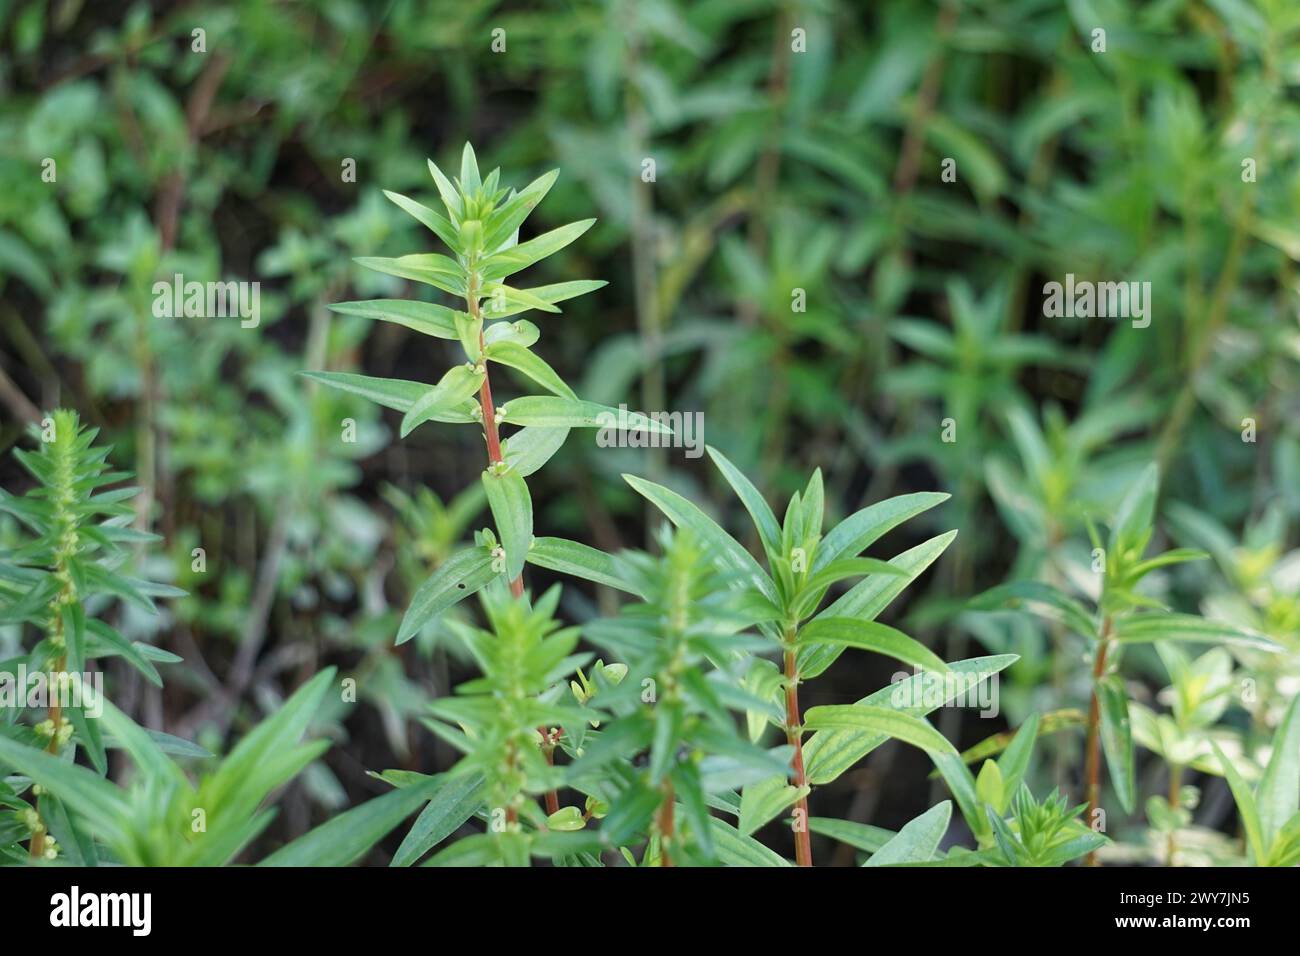 Rotala ramosior (also known lowland rotala) grass. This plant is sometimes grown in aquariums. Stock Photo